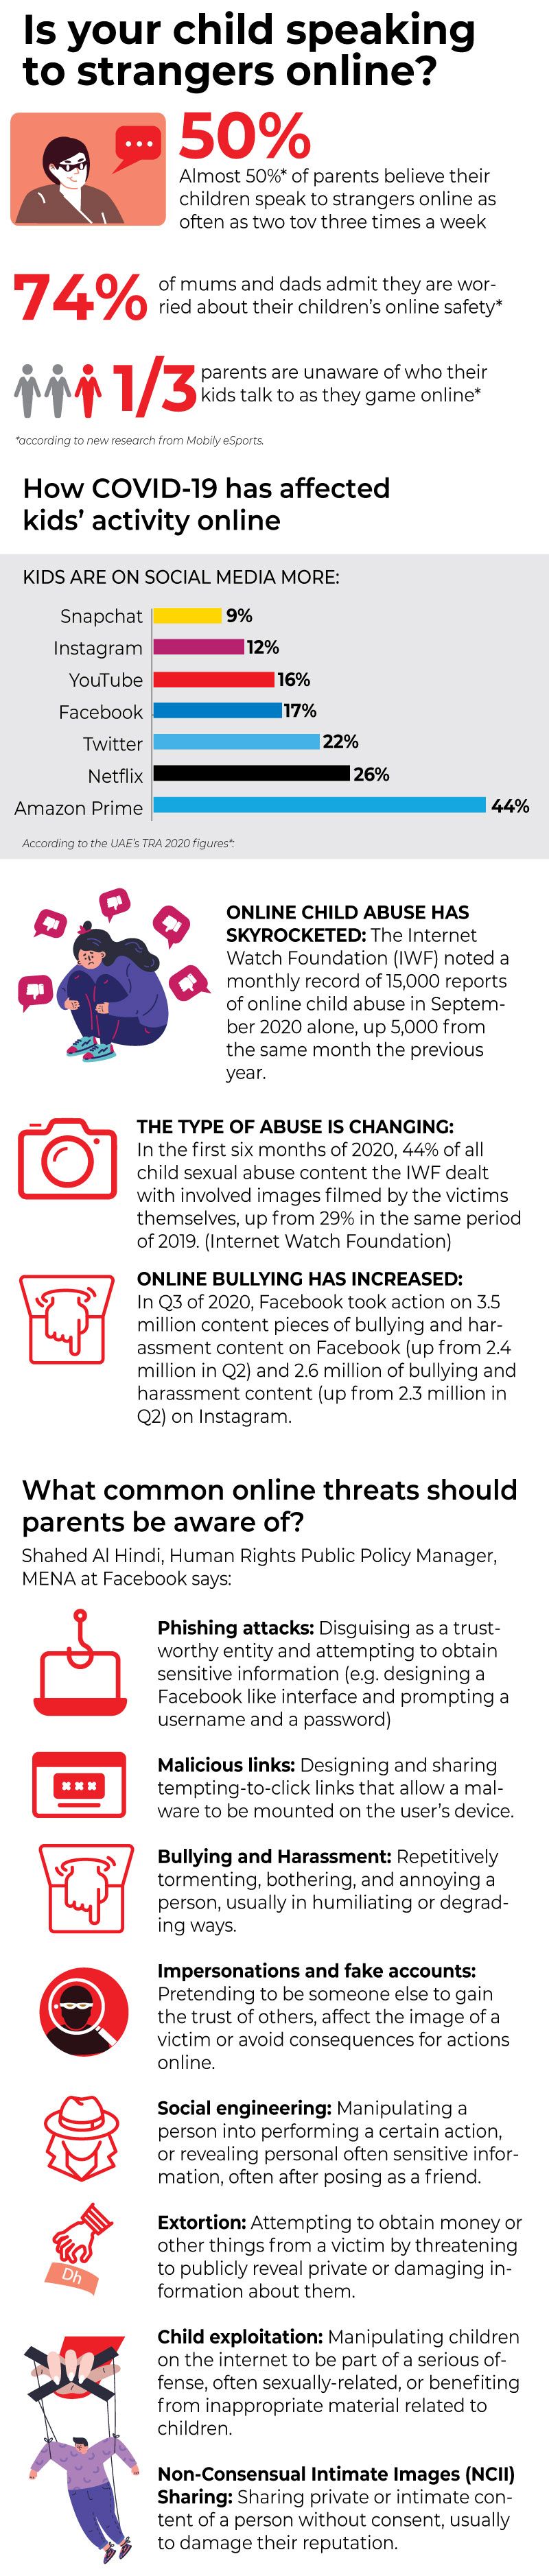 Child grooming during COVID-19: In numbers